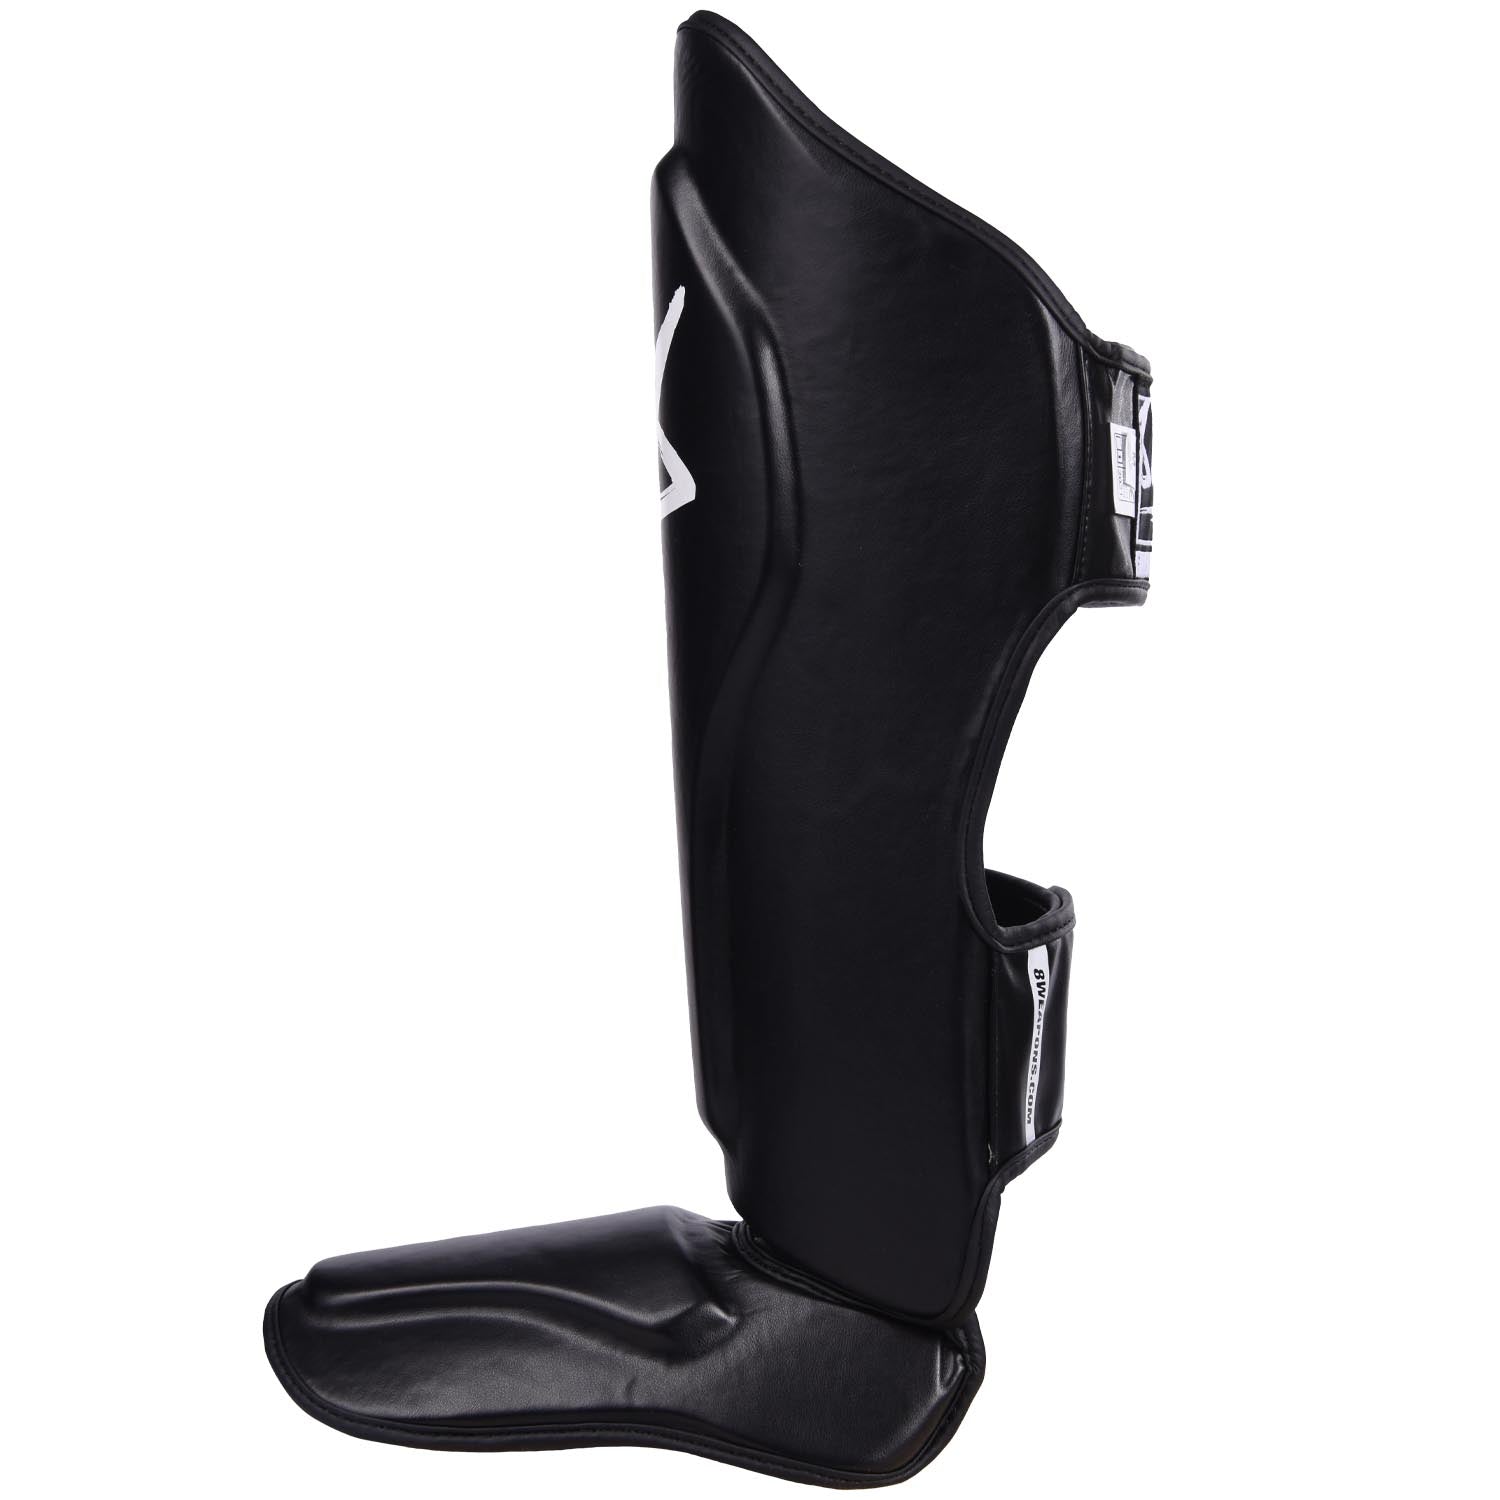 8 WEAPONS Shin Guard, Pure, black 8 WEAPONS